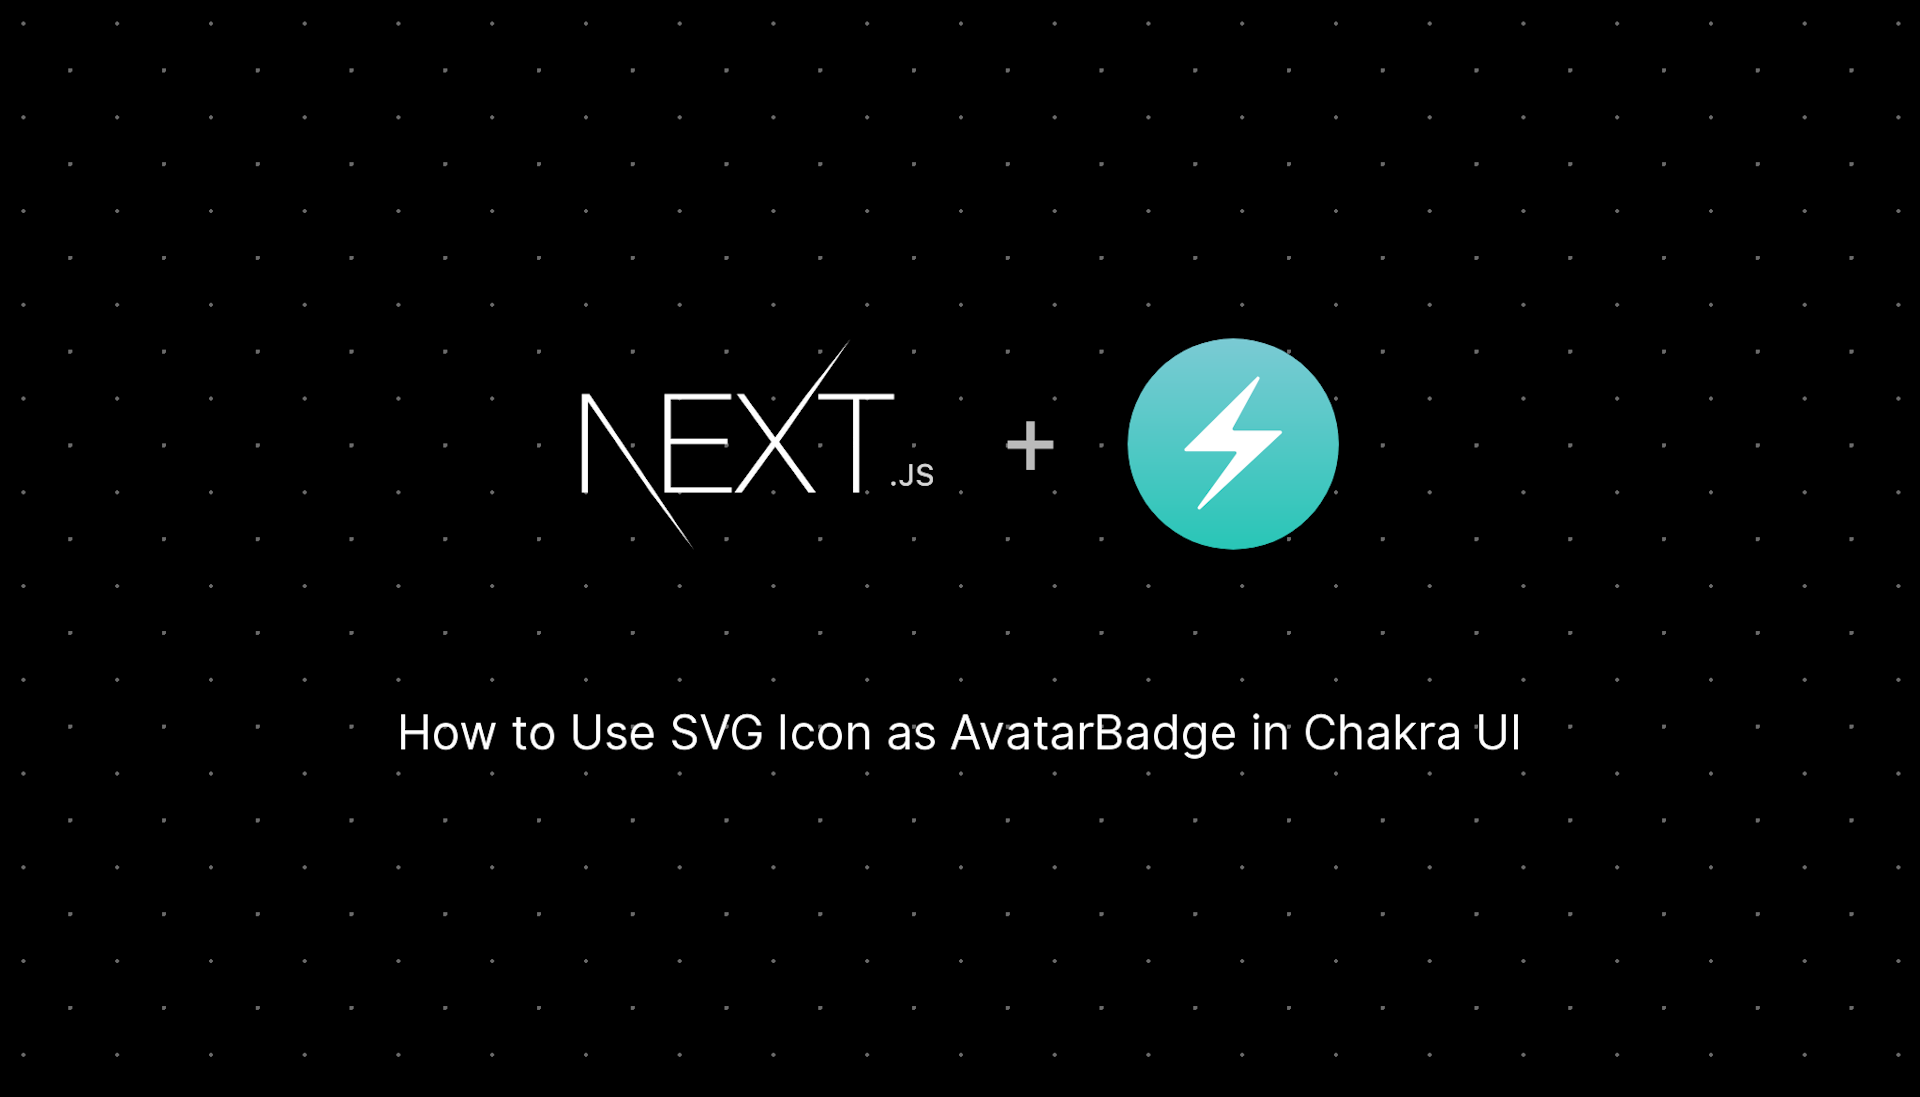 How to Use SVG Icon as AvatarBadge in Chakra UI